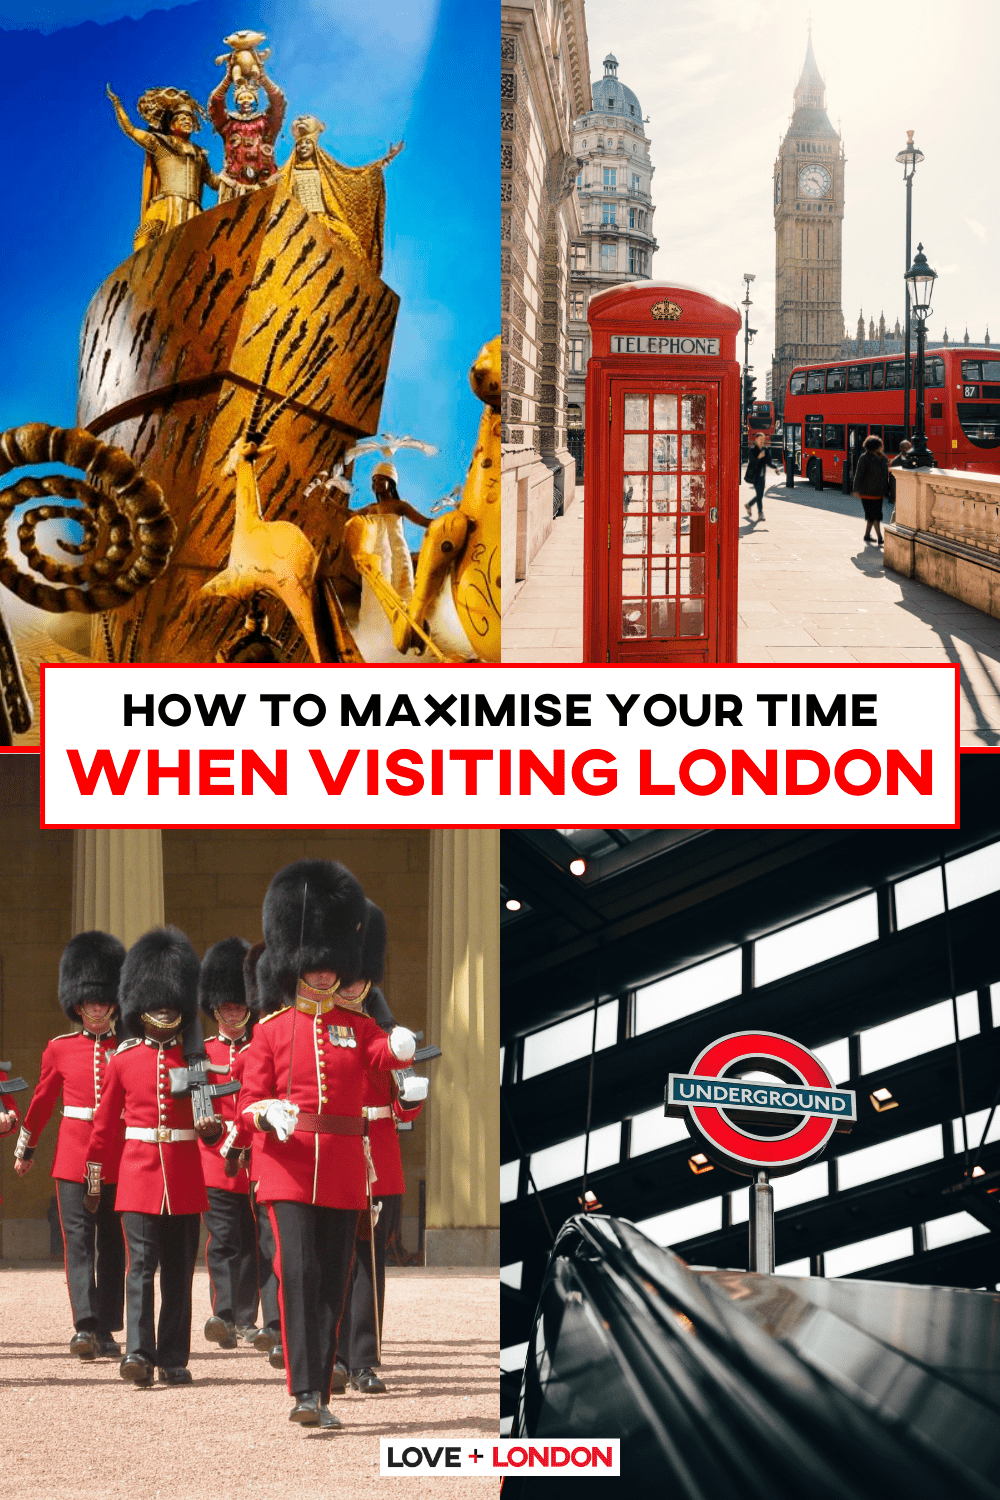 How to maximise your time when visiting London